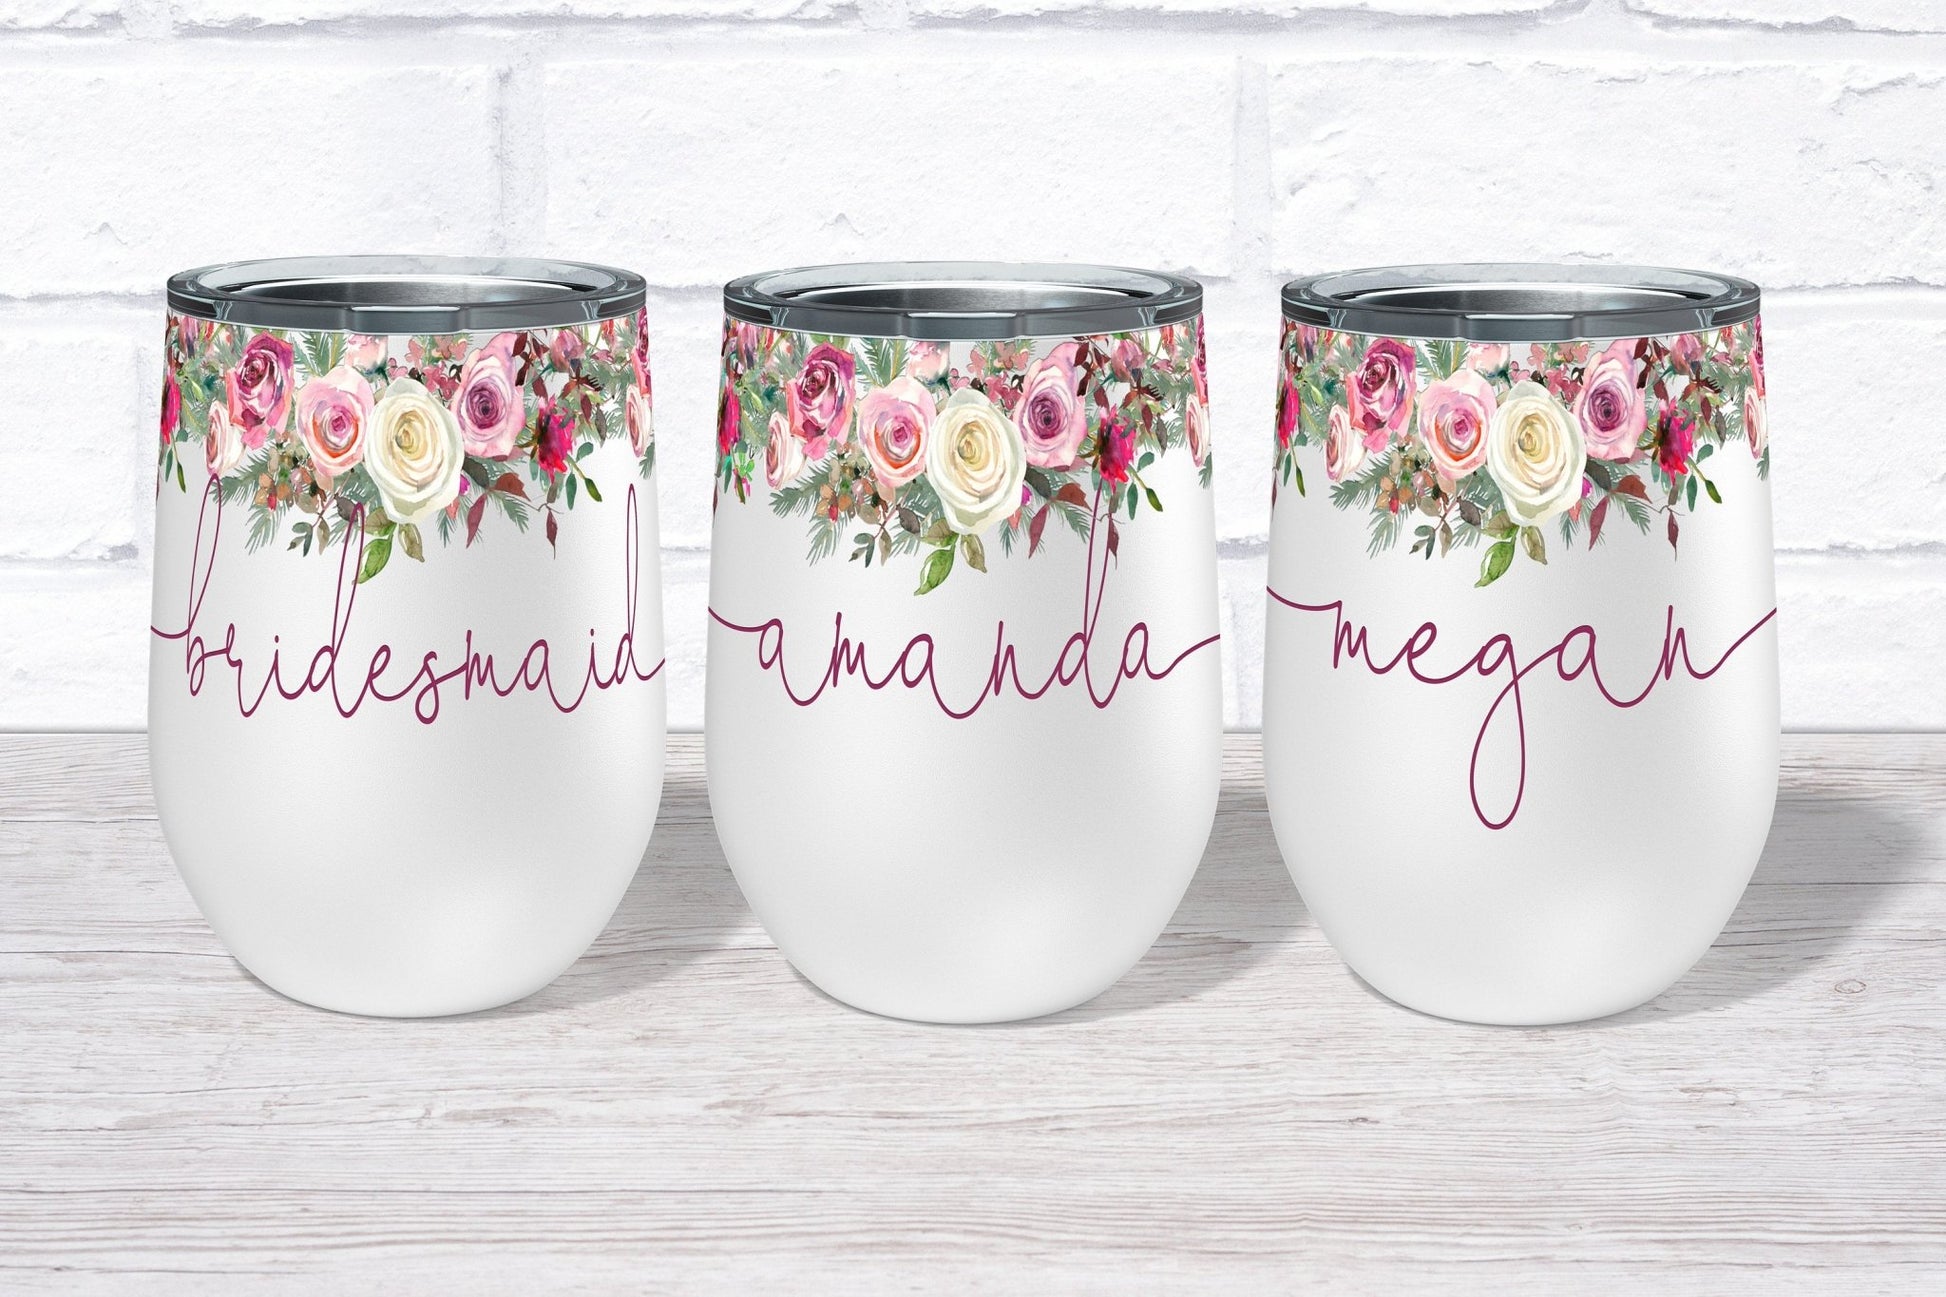 Custom Stemless wine glasses//friends gift//funny wine glass//bridesmaid  gift ideas//personalized wine glass//bridal party gift